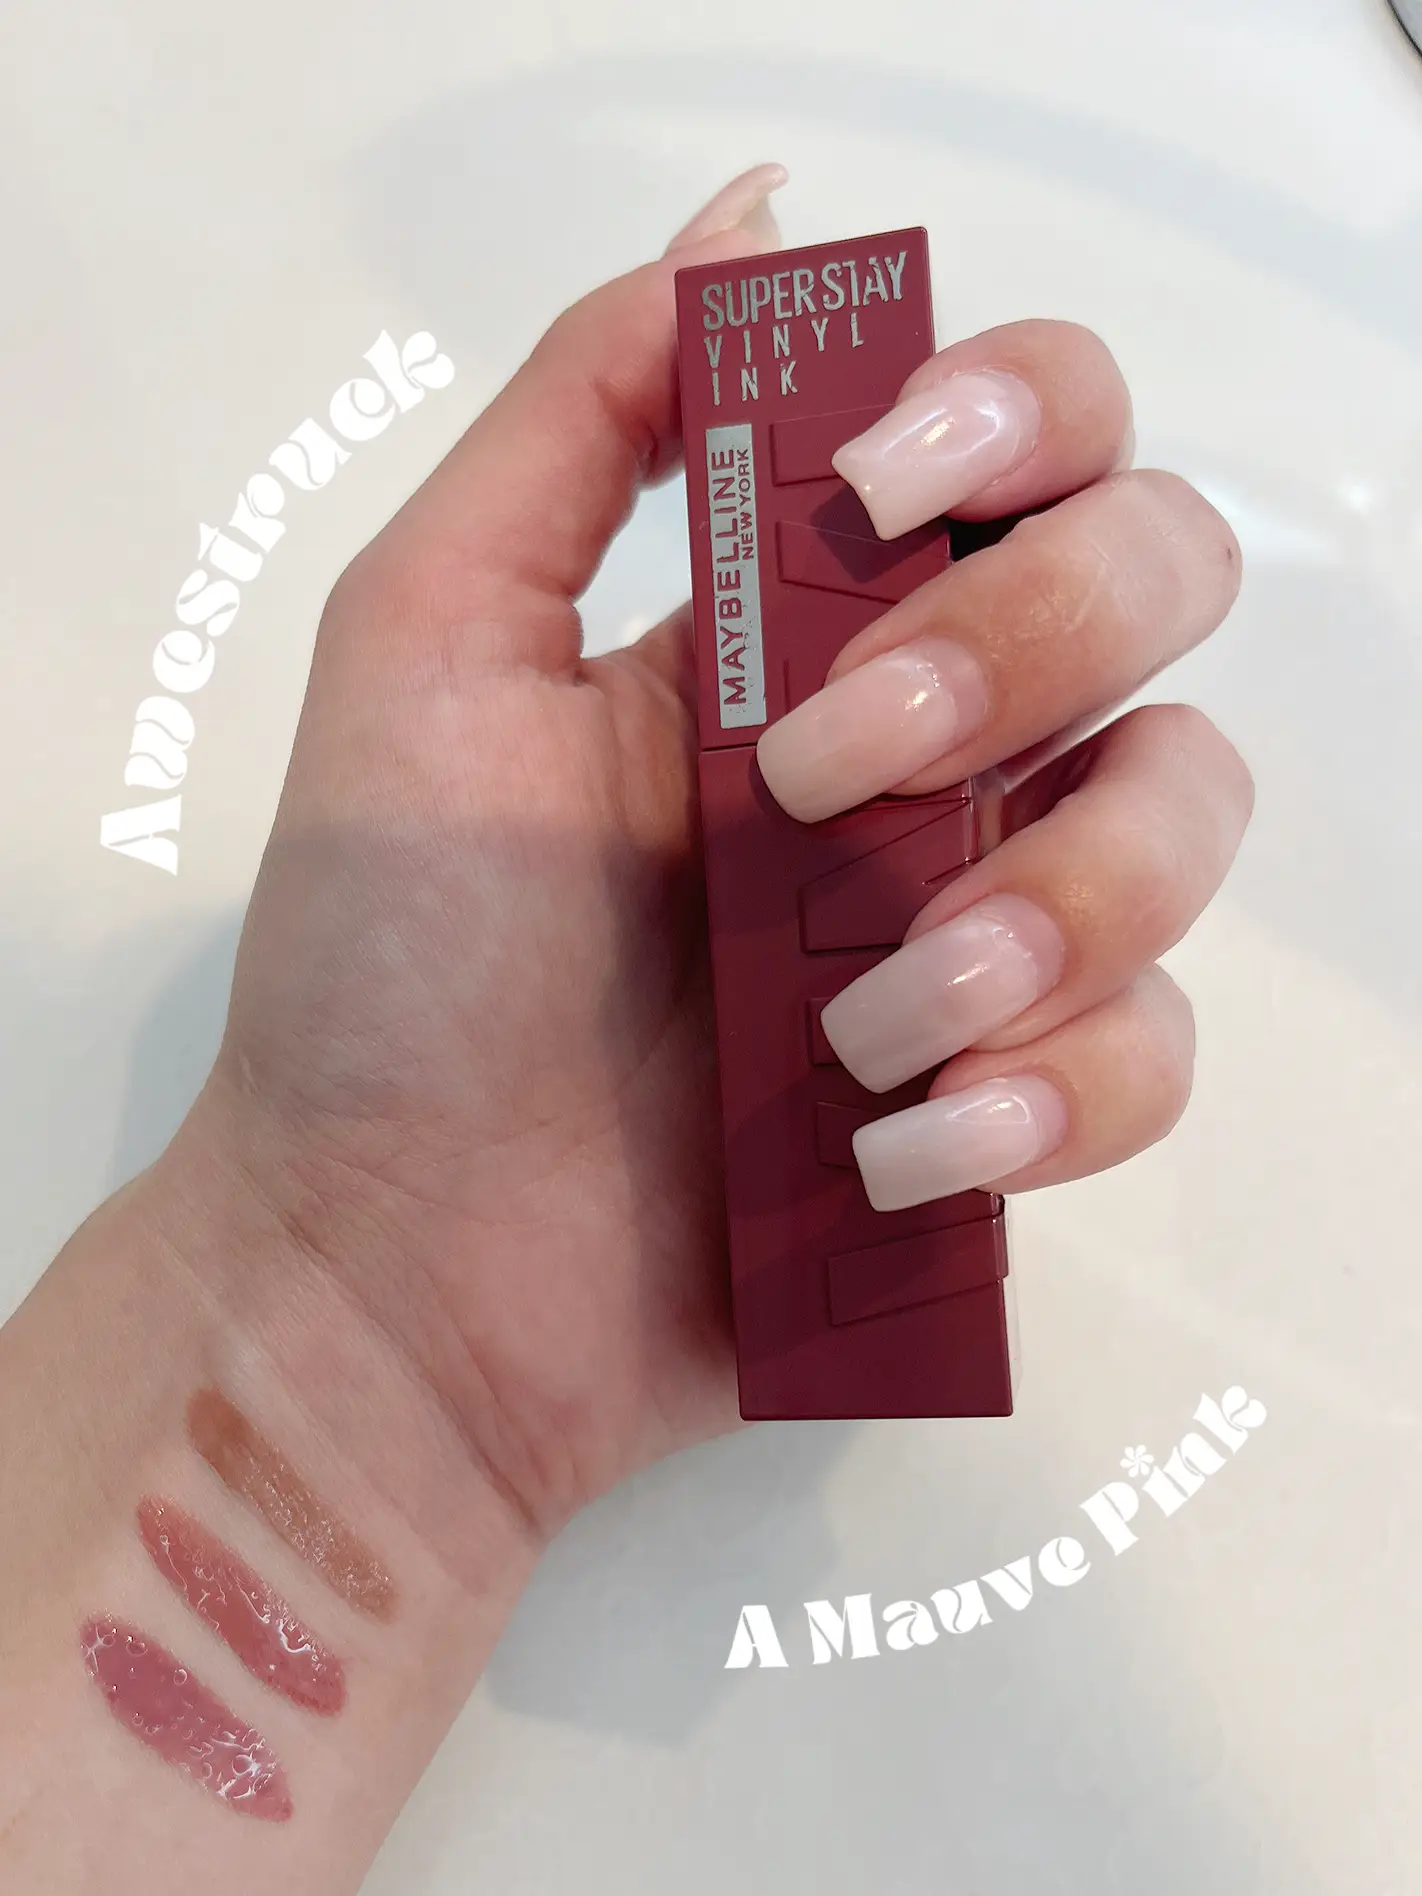 Maybelline Vinyl Lipstick Swatches Hannah | posted Eison Gallery by | Lemon8